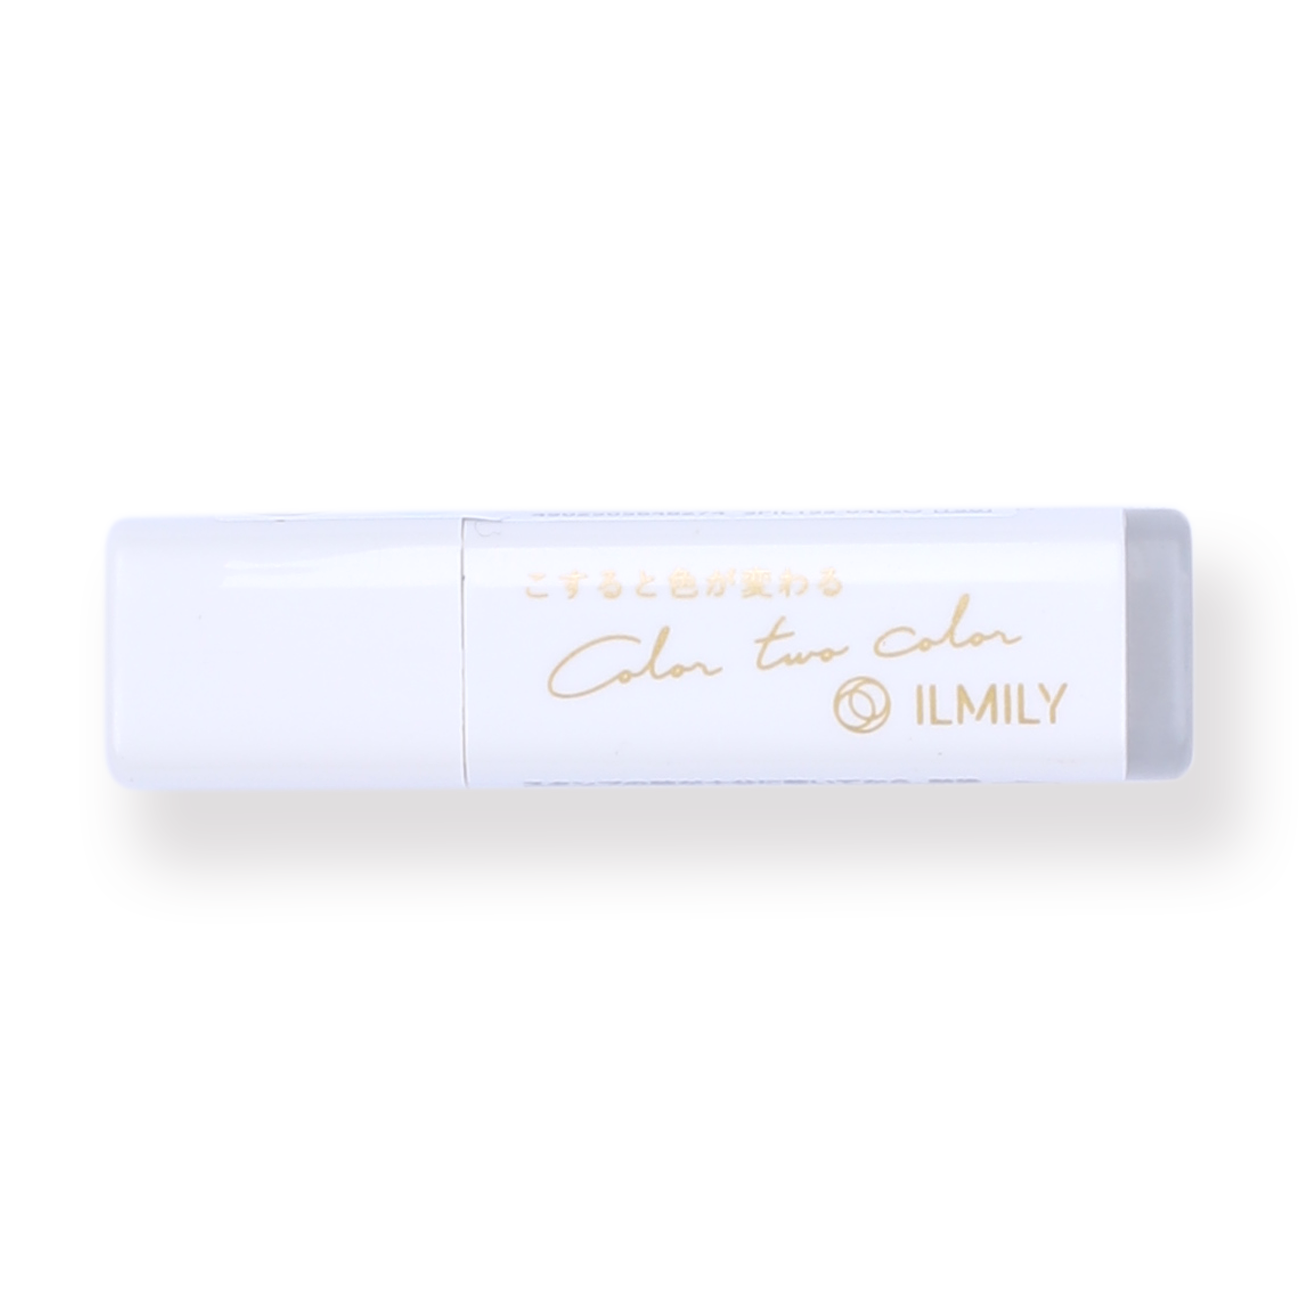 Pilot ILMILY Limited Edition Erasable Stamp - Music Note - Stationery Pal